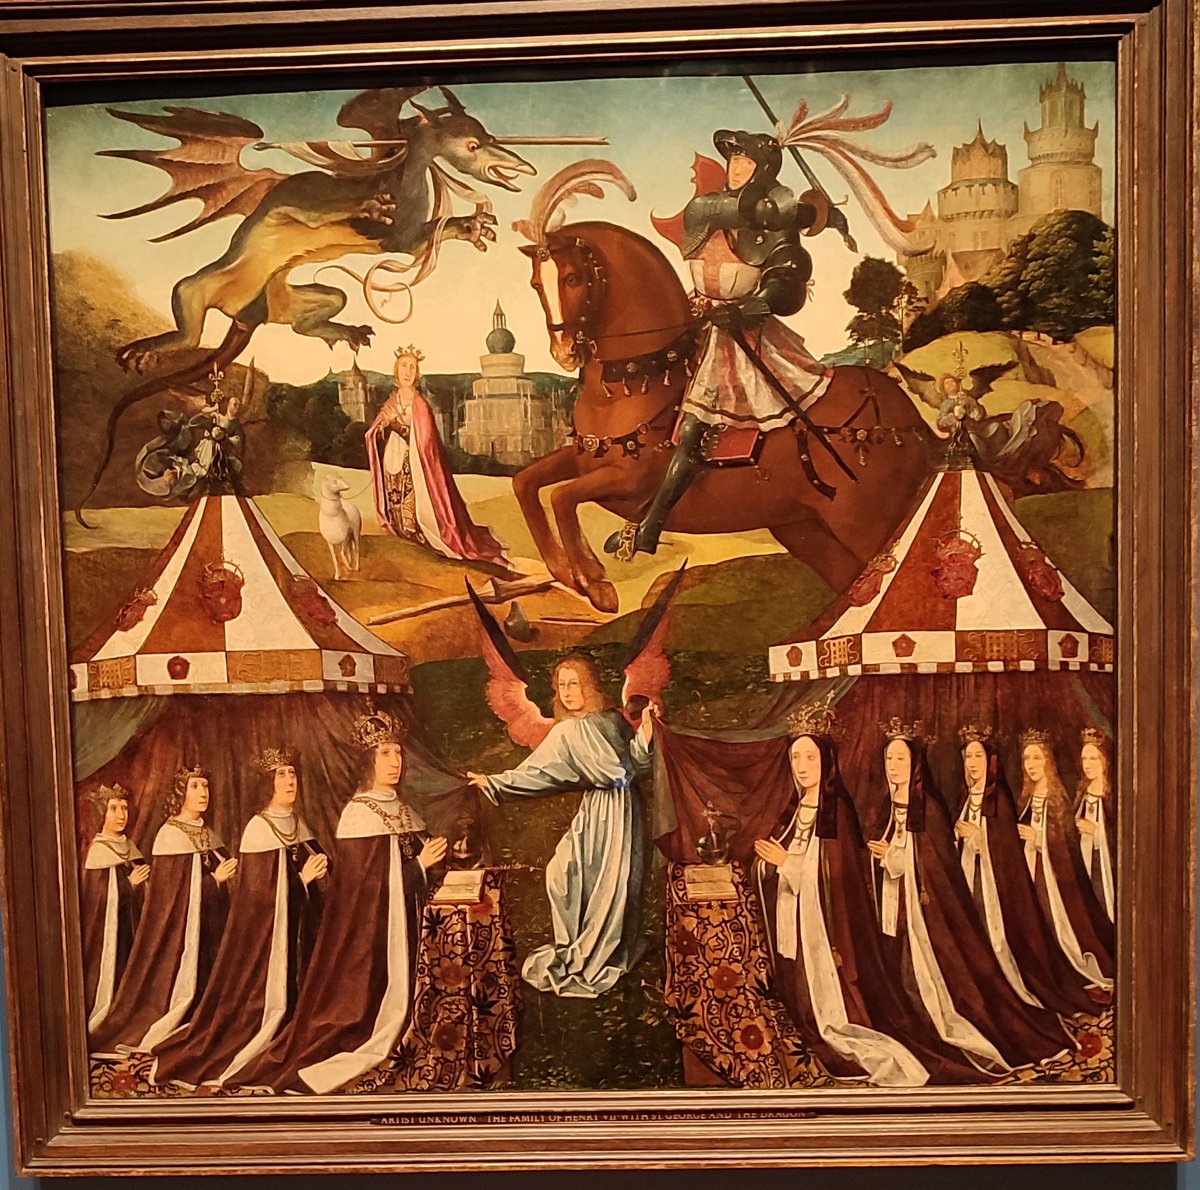 This altarpiece of the early Tudor royal family with St George was among the unexpected bonus items in the recent Holbein exhibition. St George was dear to the House of York too - a prayer to him was inserted in Duke Richard's book of hours, and Cecily owned a tapestry of him.